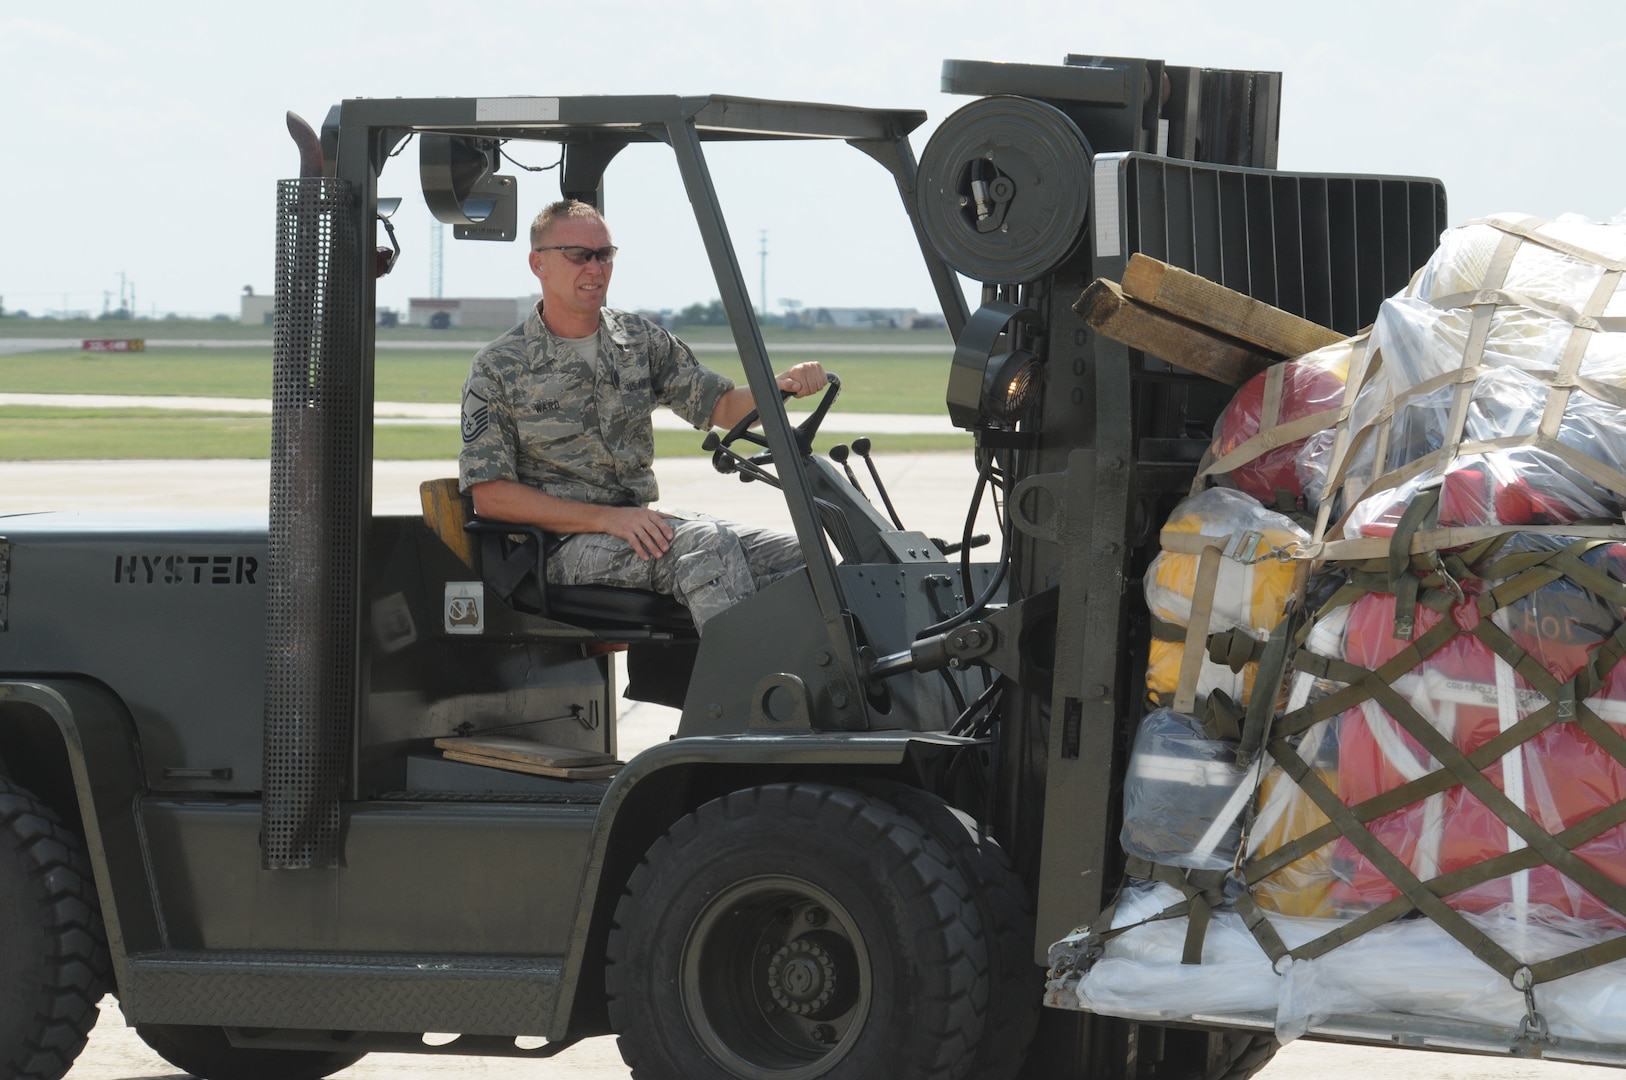 An Airman prepares to load a C-130 on the Randolph flightline Sept. 13. Airmen from across the United States prepared for search and rescue missions last week as Hurricane Ike approached the Texas coastline. (U.S. Air Force photo by Steve White)